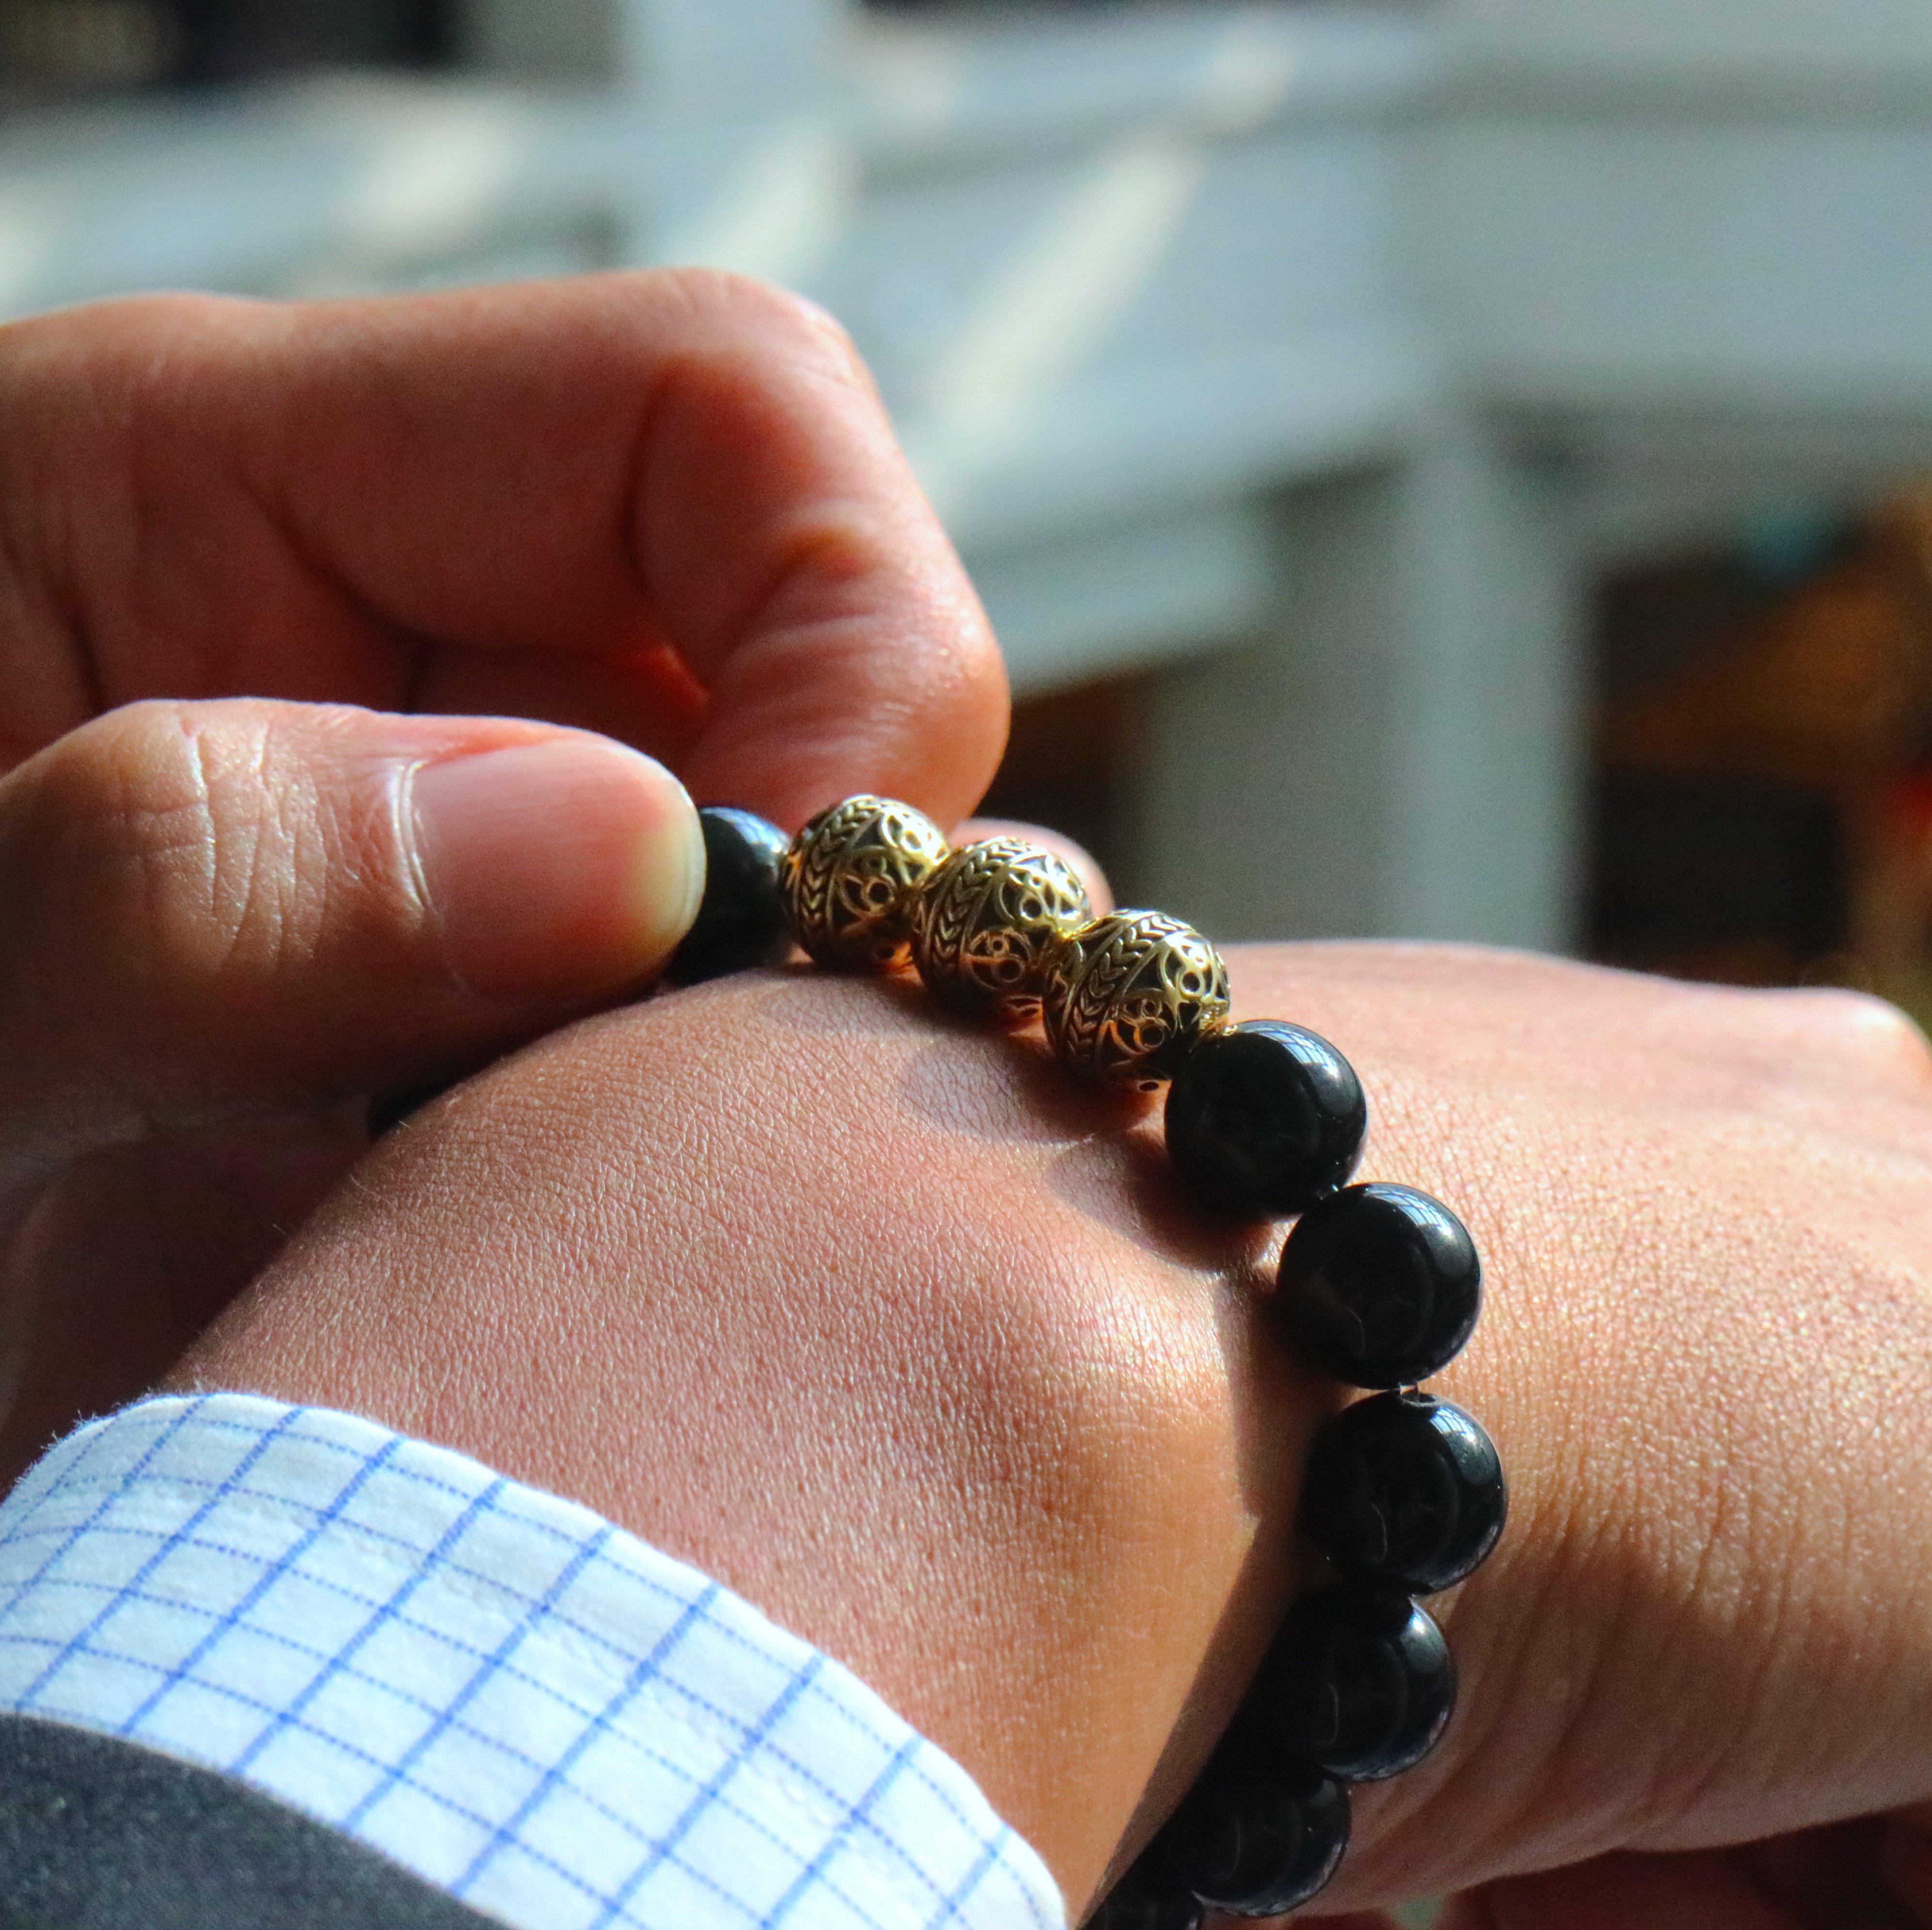 Amazon.com: Triple protection bracelet, Tiger Eye Bracelet for Men Women,  10MM Crystal Stone Beaded Black Obsidian Bracelet, Anxiety Relief,increase  courage and determination, Healing Energy Bead Bracelet : Handmade Products